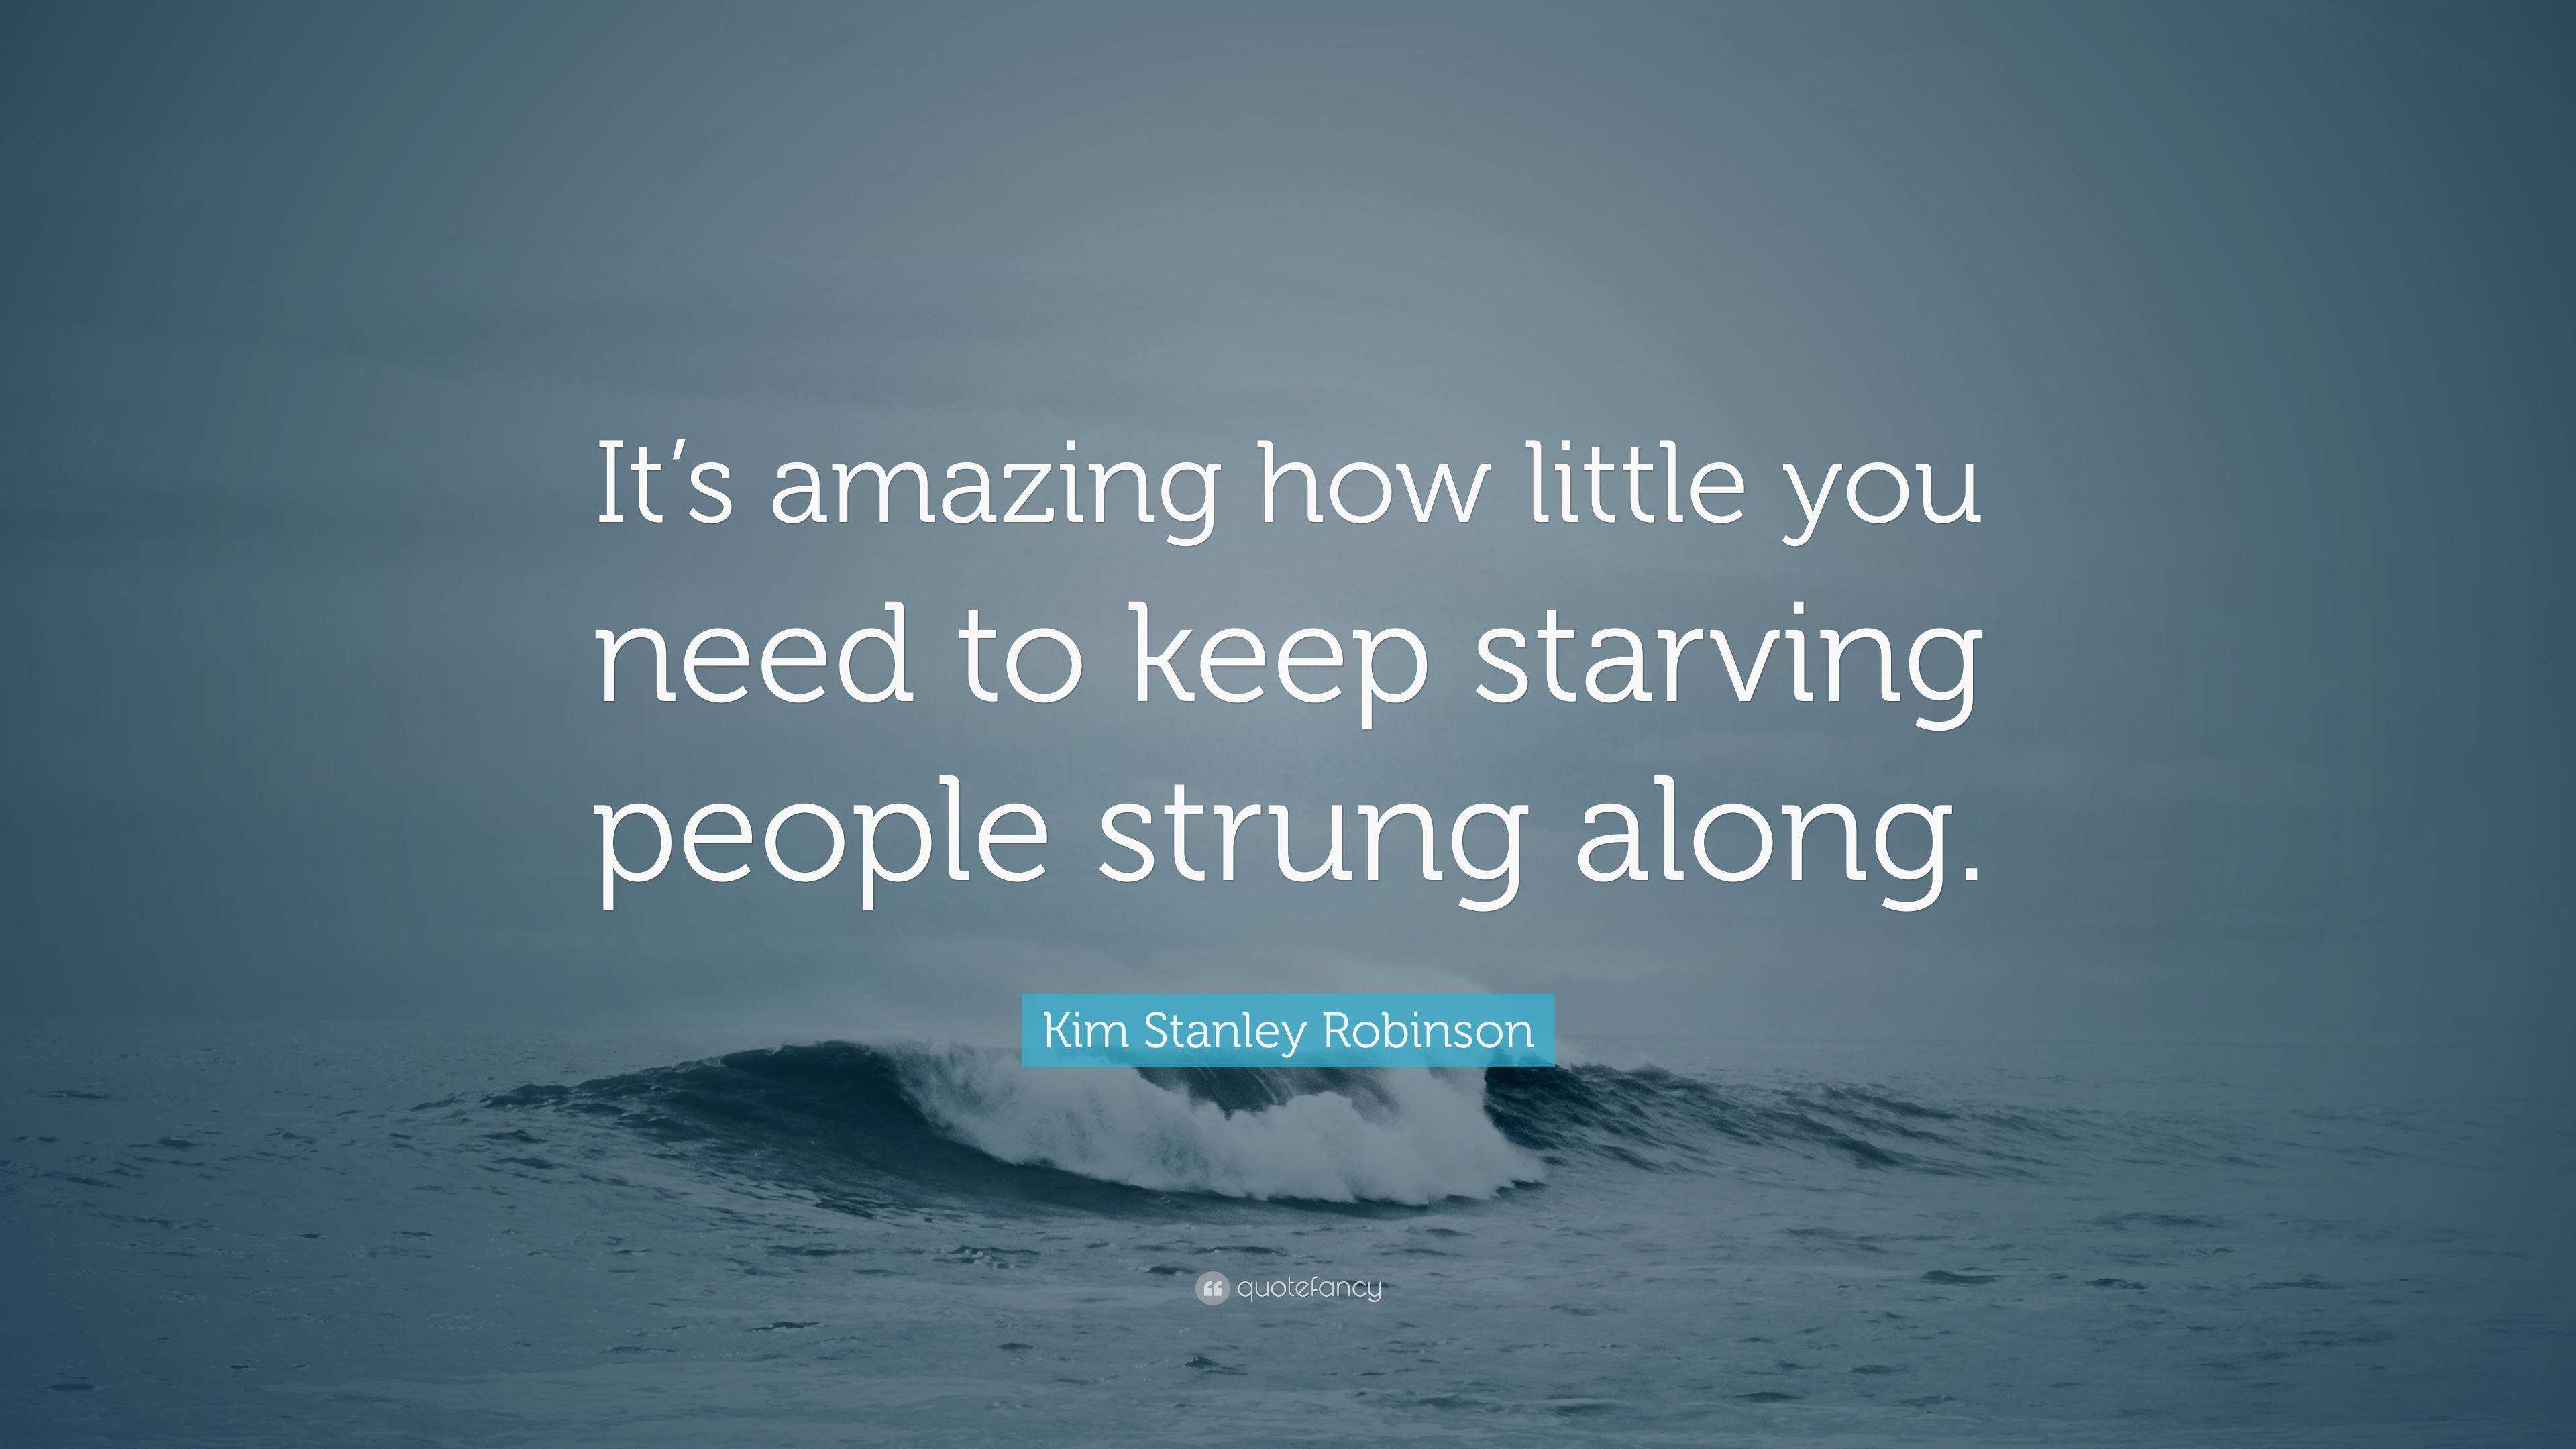 Kim Stanley Robinson Quote “its Amazing How Little You Need To Keep Starving People Strung Along” 